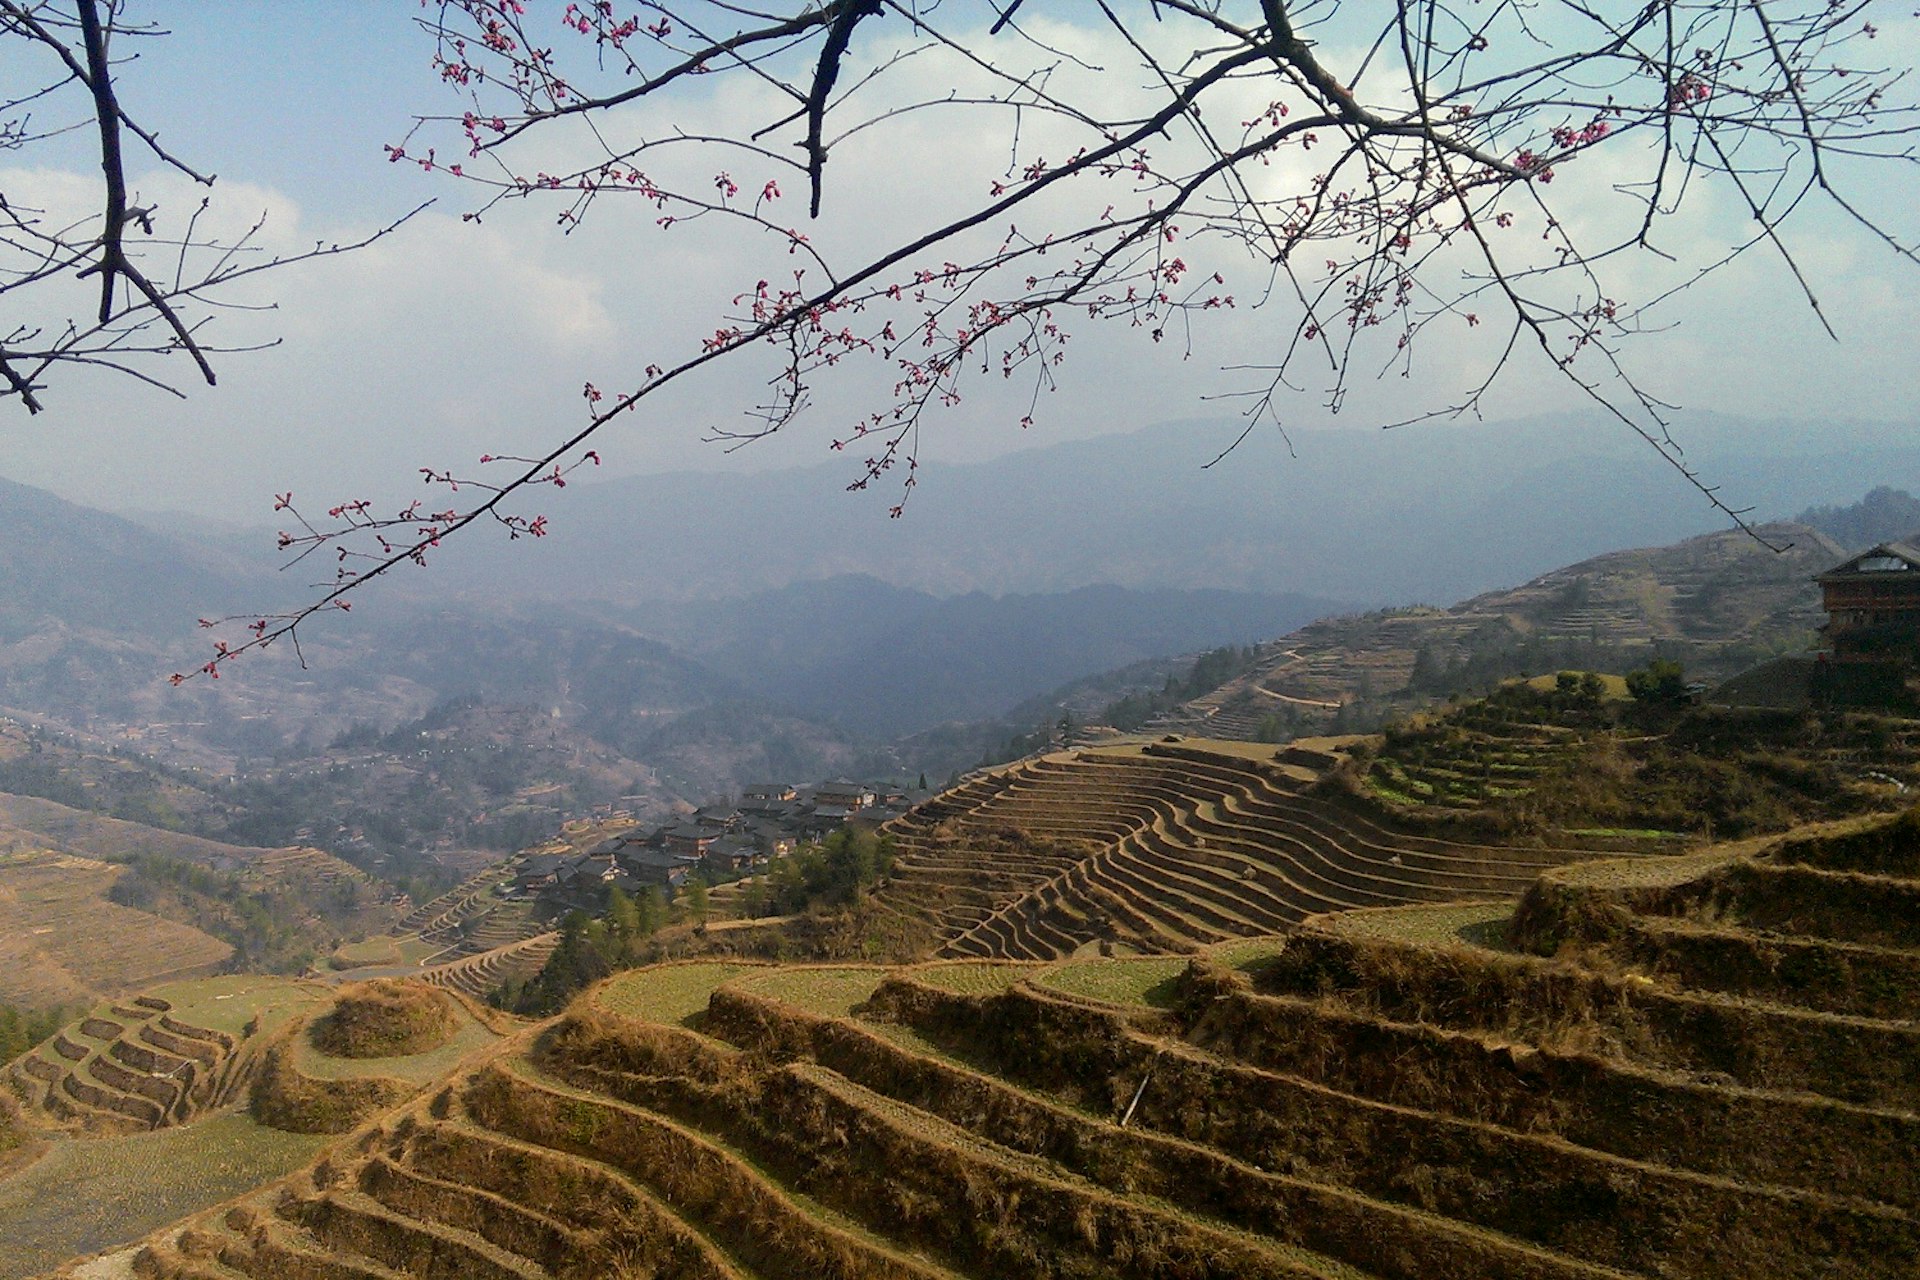 Expansive Guangxi views over the Longji Rice Terraces. Image by Piera Chen / Lonely Planet